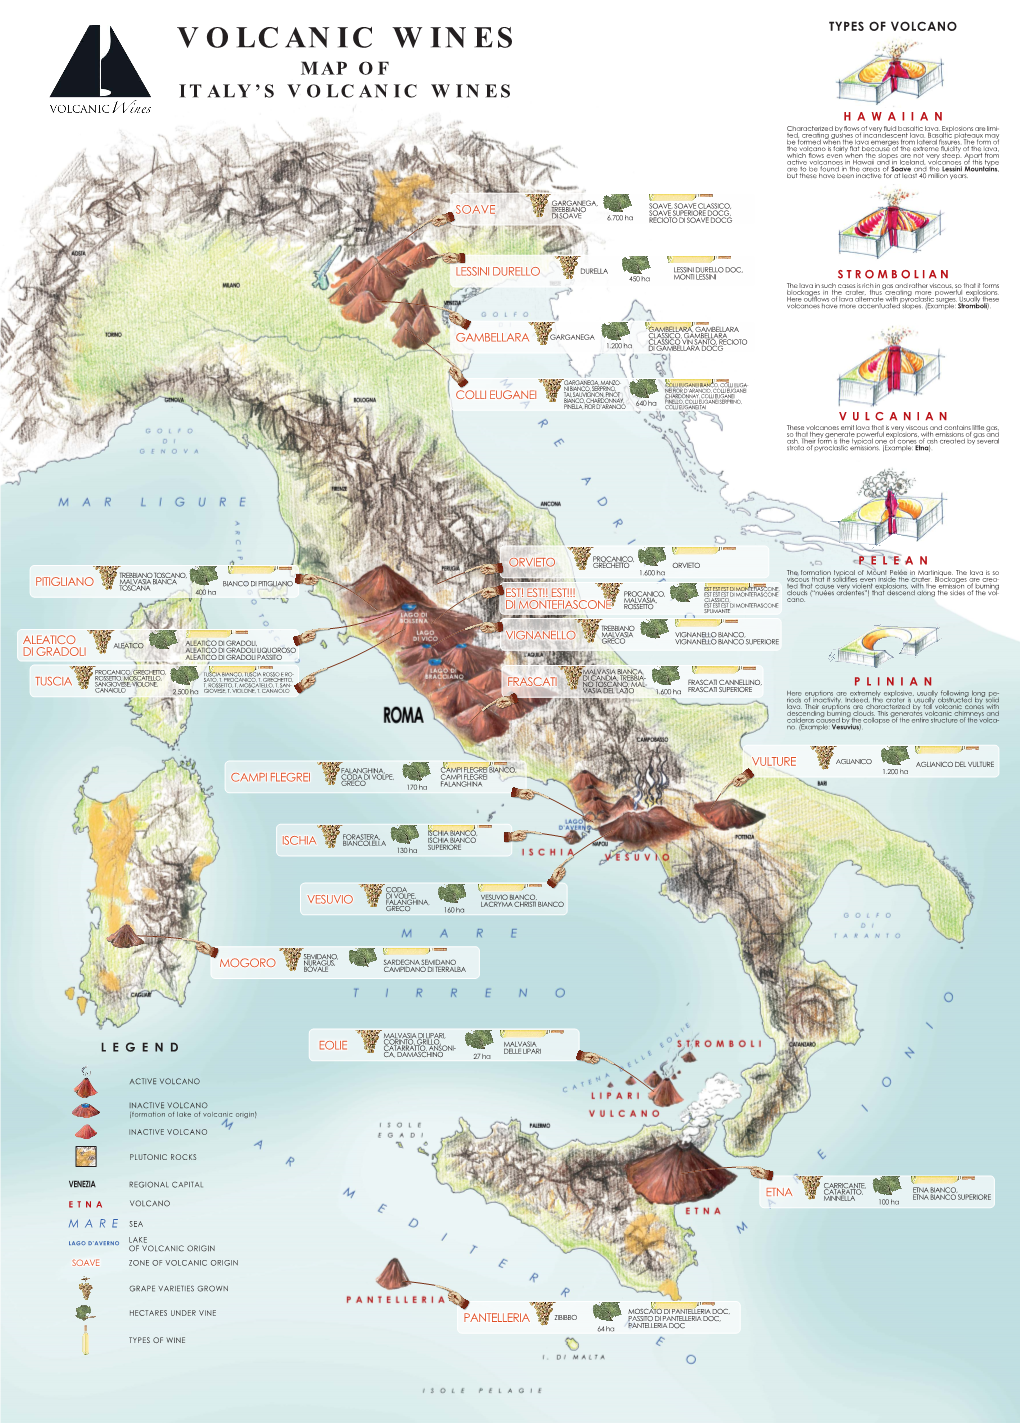 VOLCANIC WINES MAP of ITALY’S VOLCANIC WINES HAWAIIAN Characterized by Lows of Very Luid Basaltic Lava